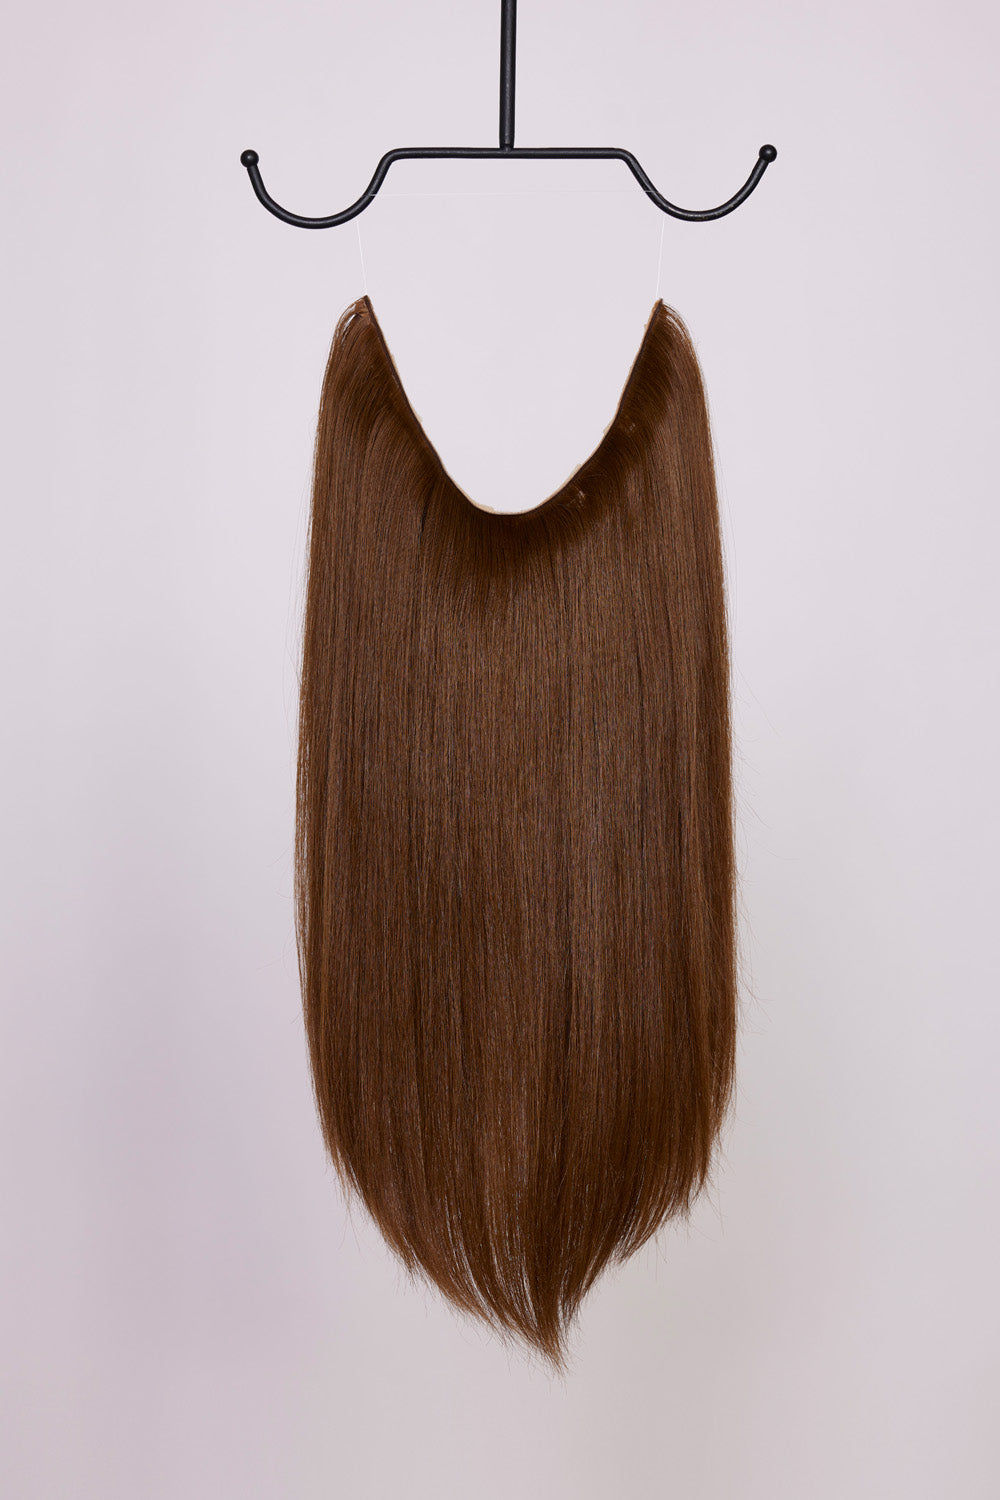 BHBD Hairband a warmer brown 40 cm.100% Remy hair. Clip-in, halo, or ponytail.